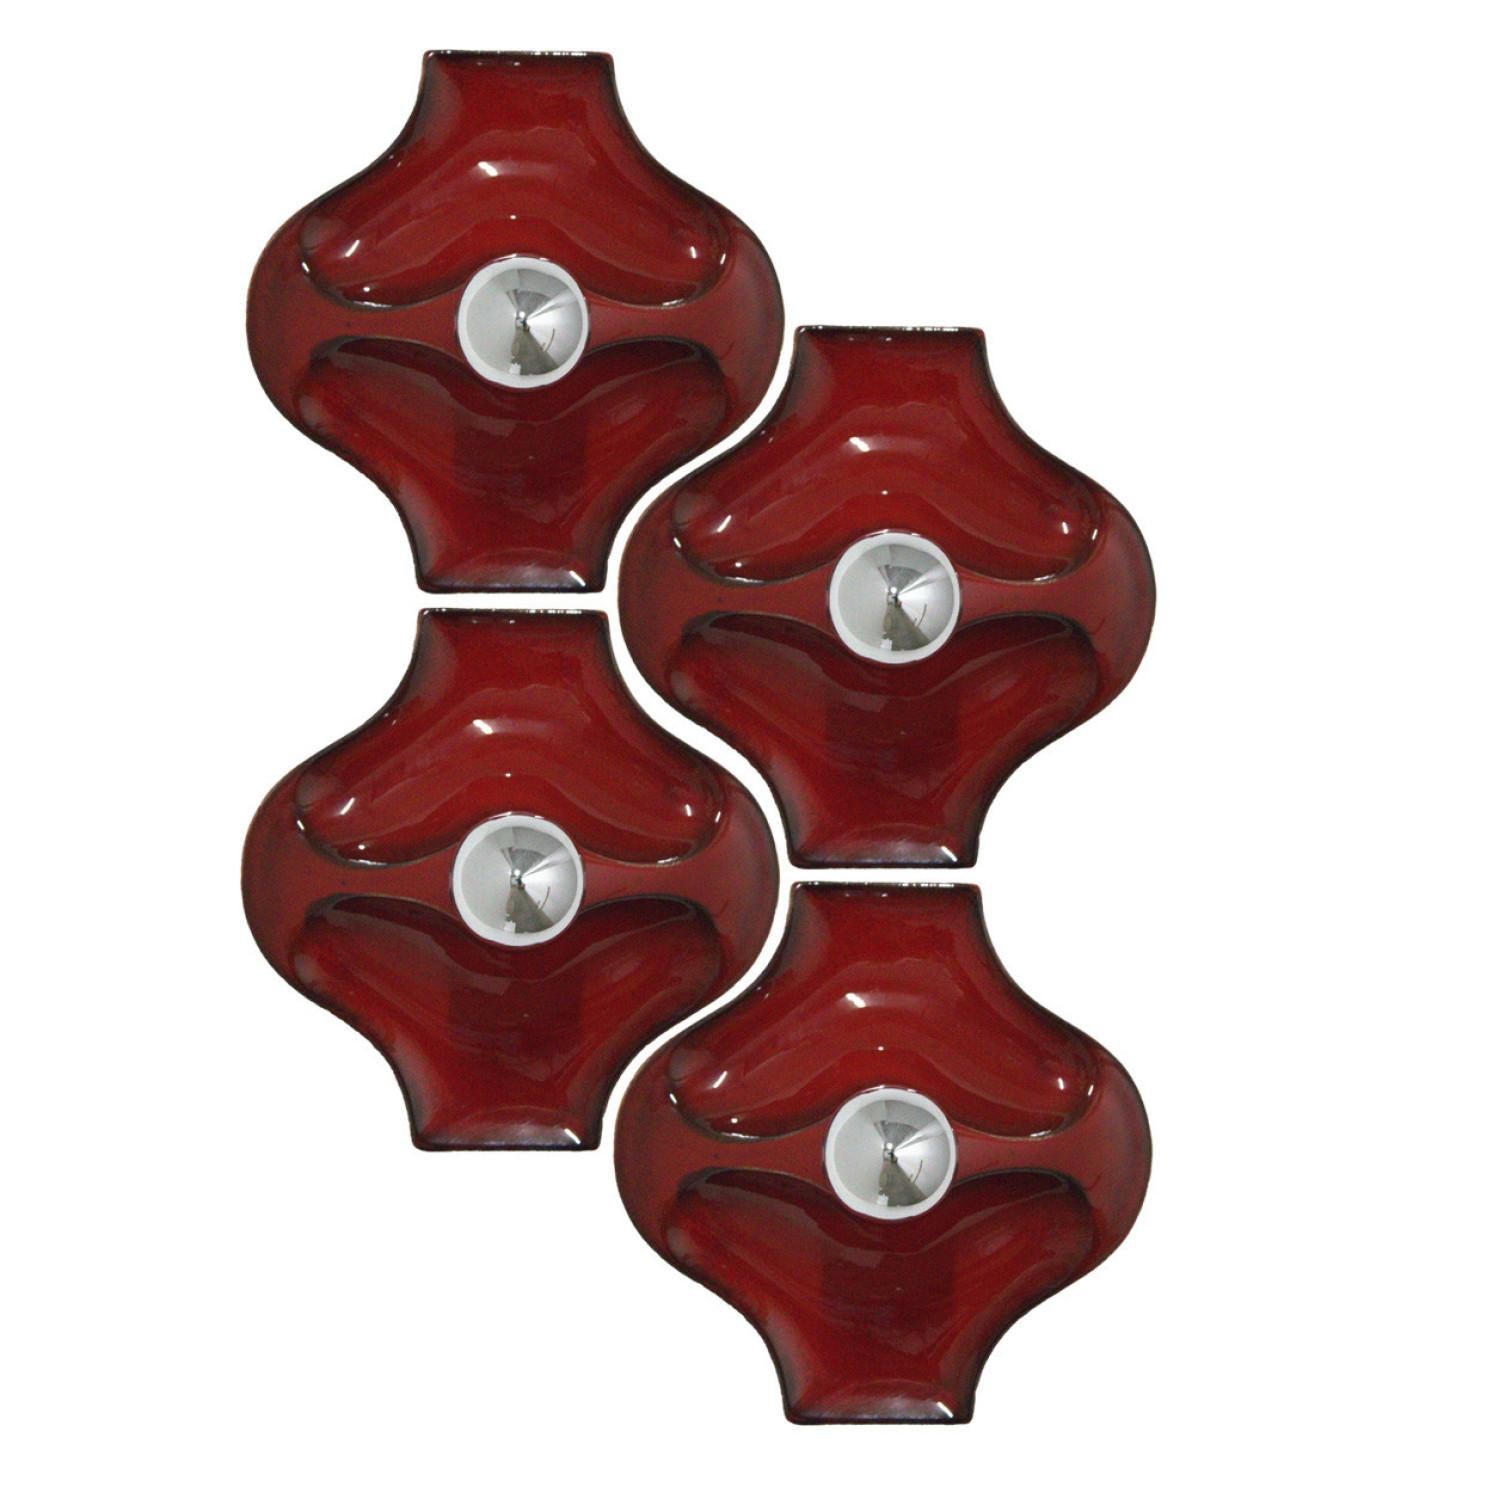 Red Ceramic Wall Lights by Hustadt Keramik, Germany, 1970 For Sale 2